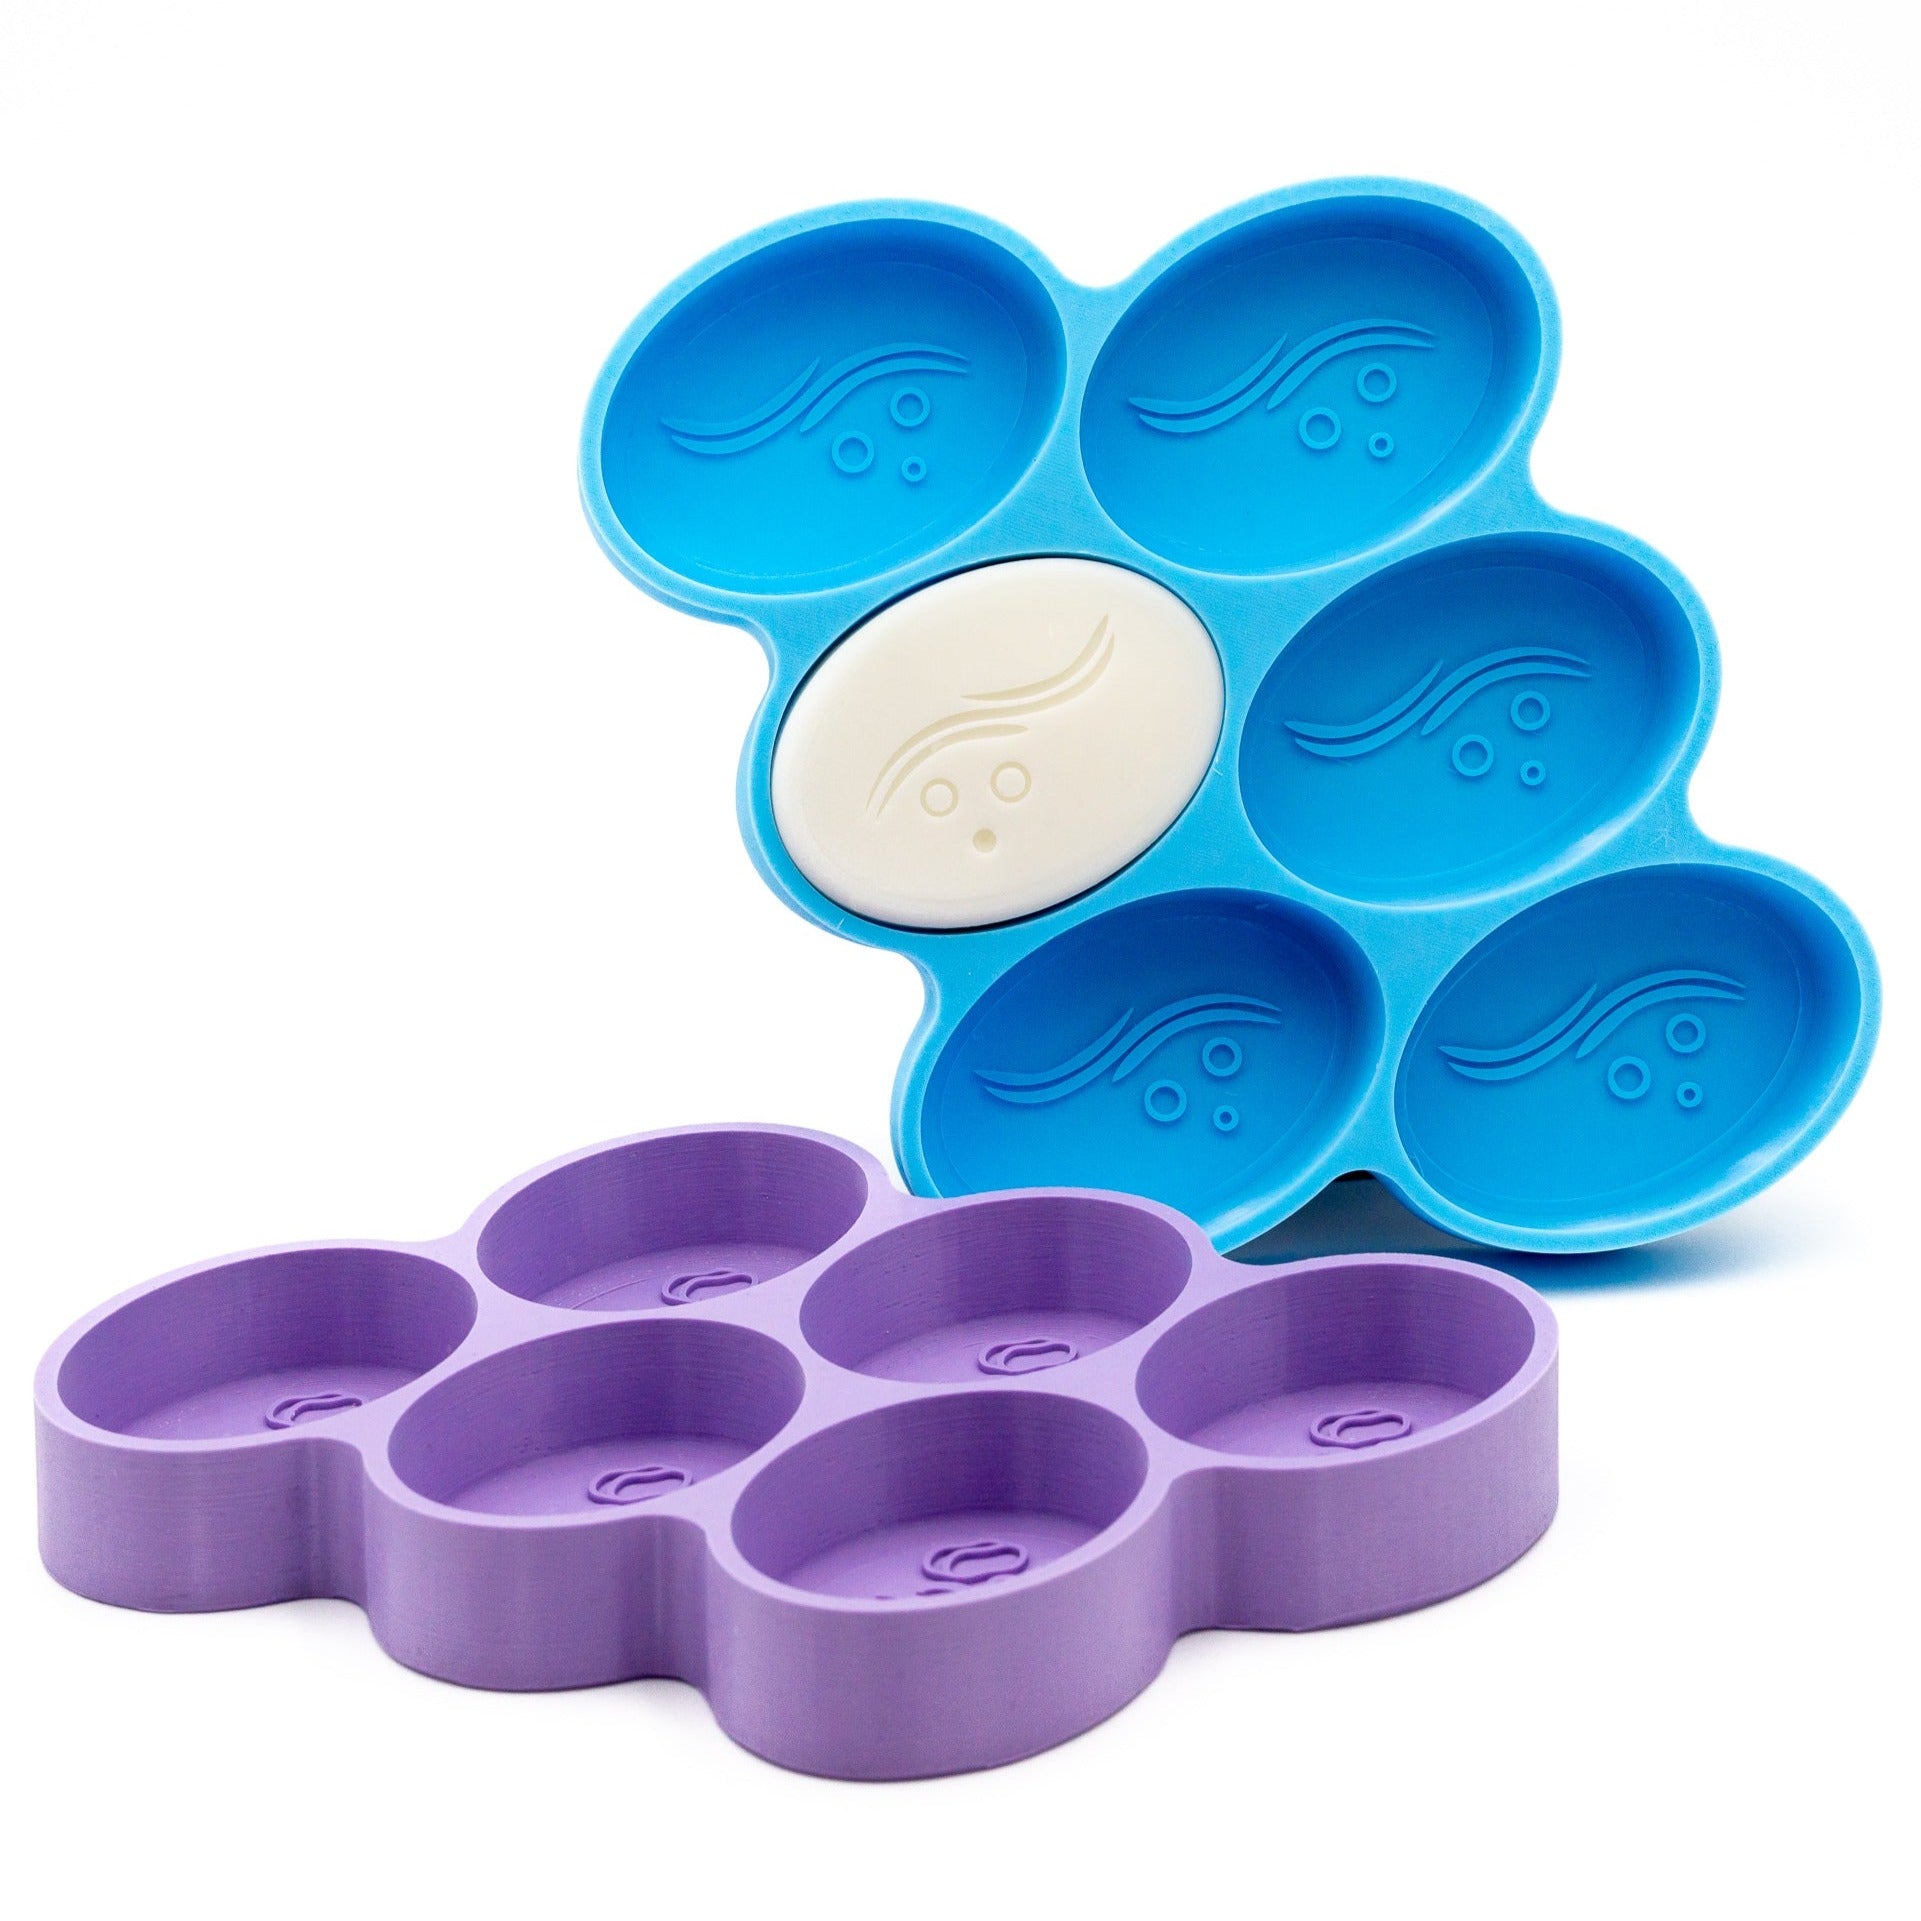 New Style 6 Cavity Oval Soap Mold Silicone Molds for Soap Making